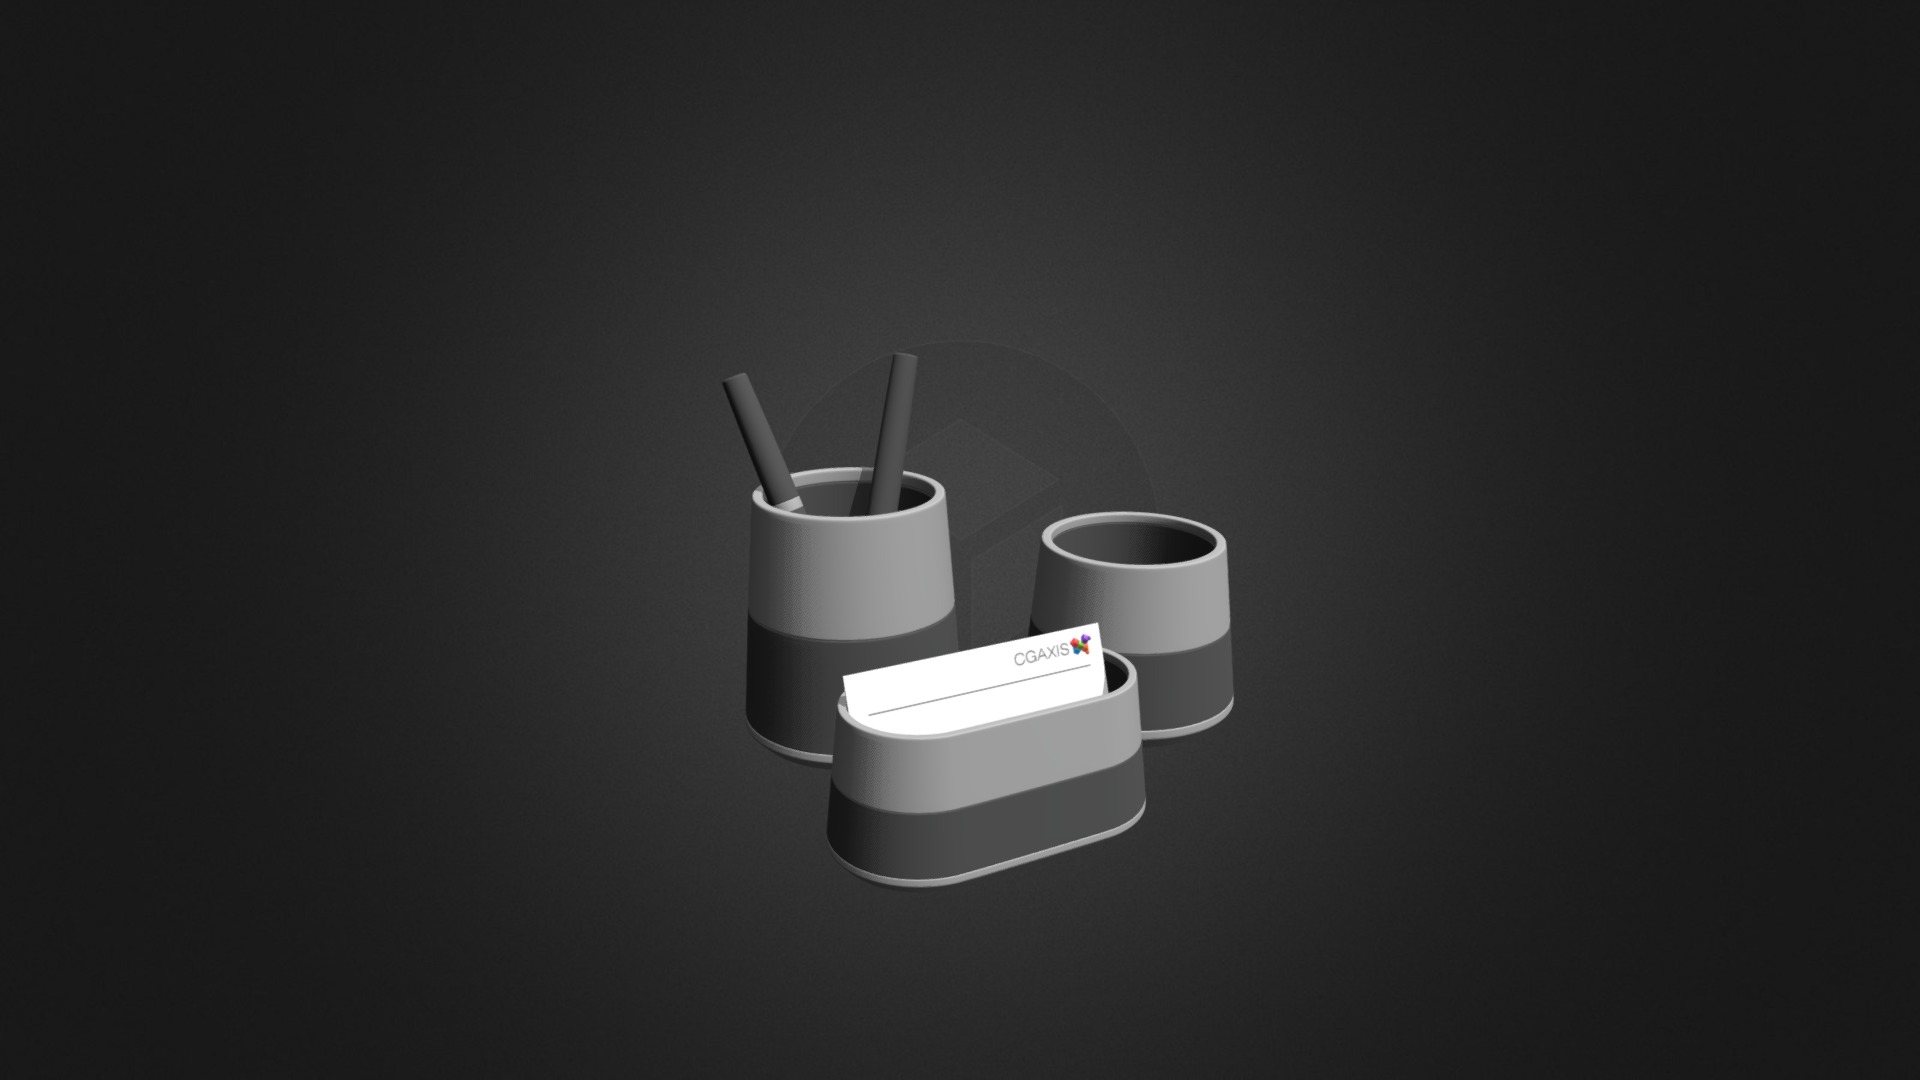 3D model Office Desk Accessories - This is a 3D model of the Office Desk Accessories. The 3D model is about a group of white and black objects.